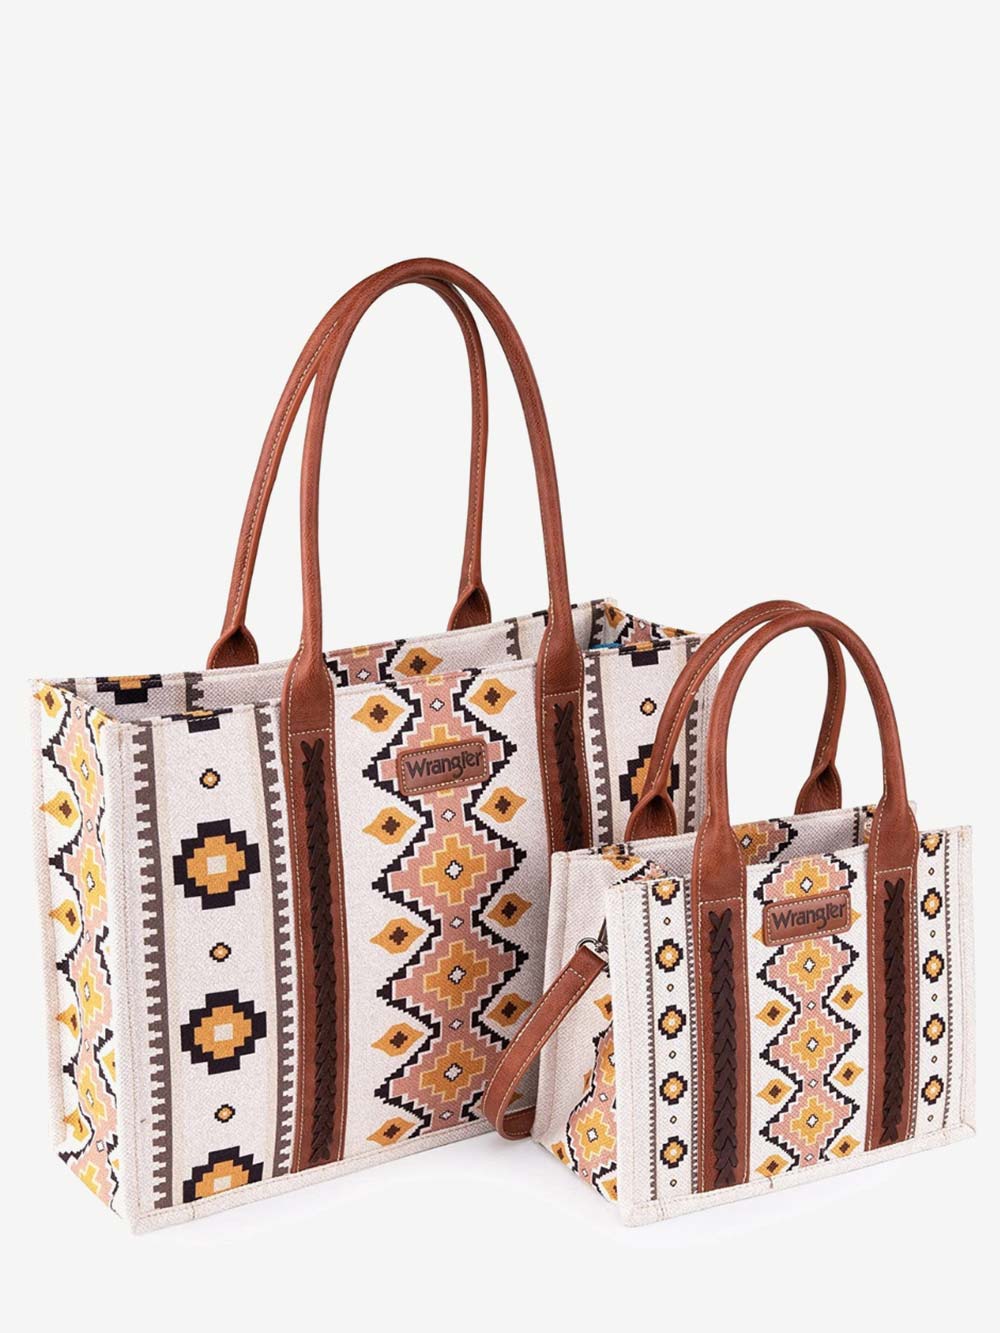 Wrangler Southwestern Dual Sided Print Canvas Tote Collection - Montana West World